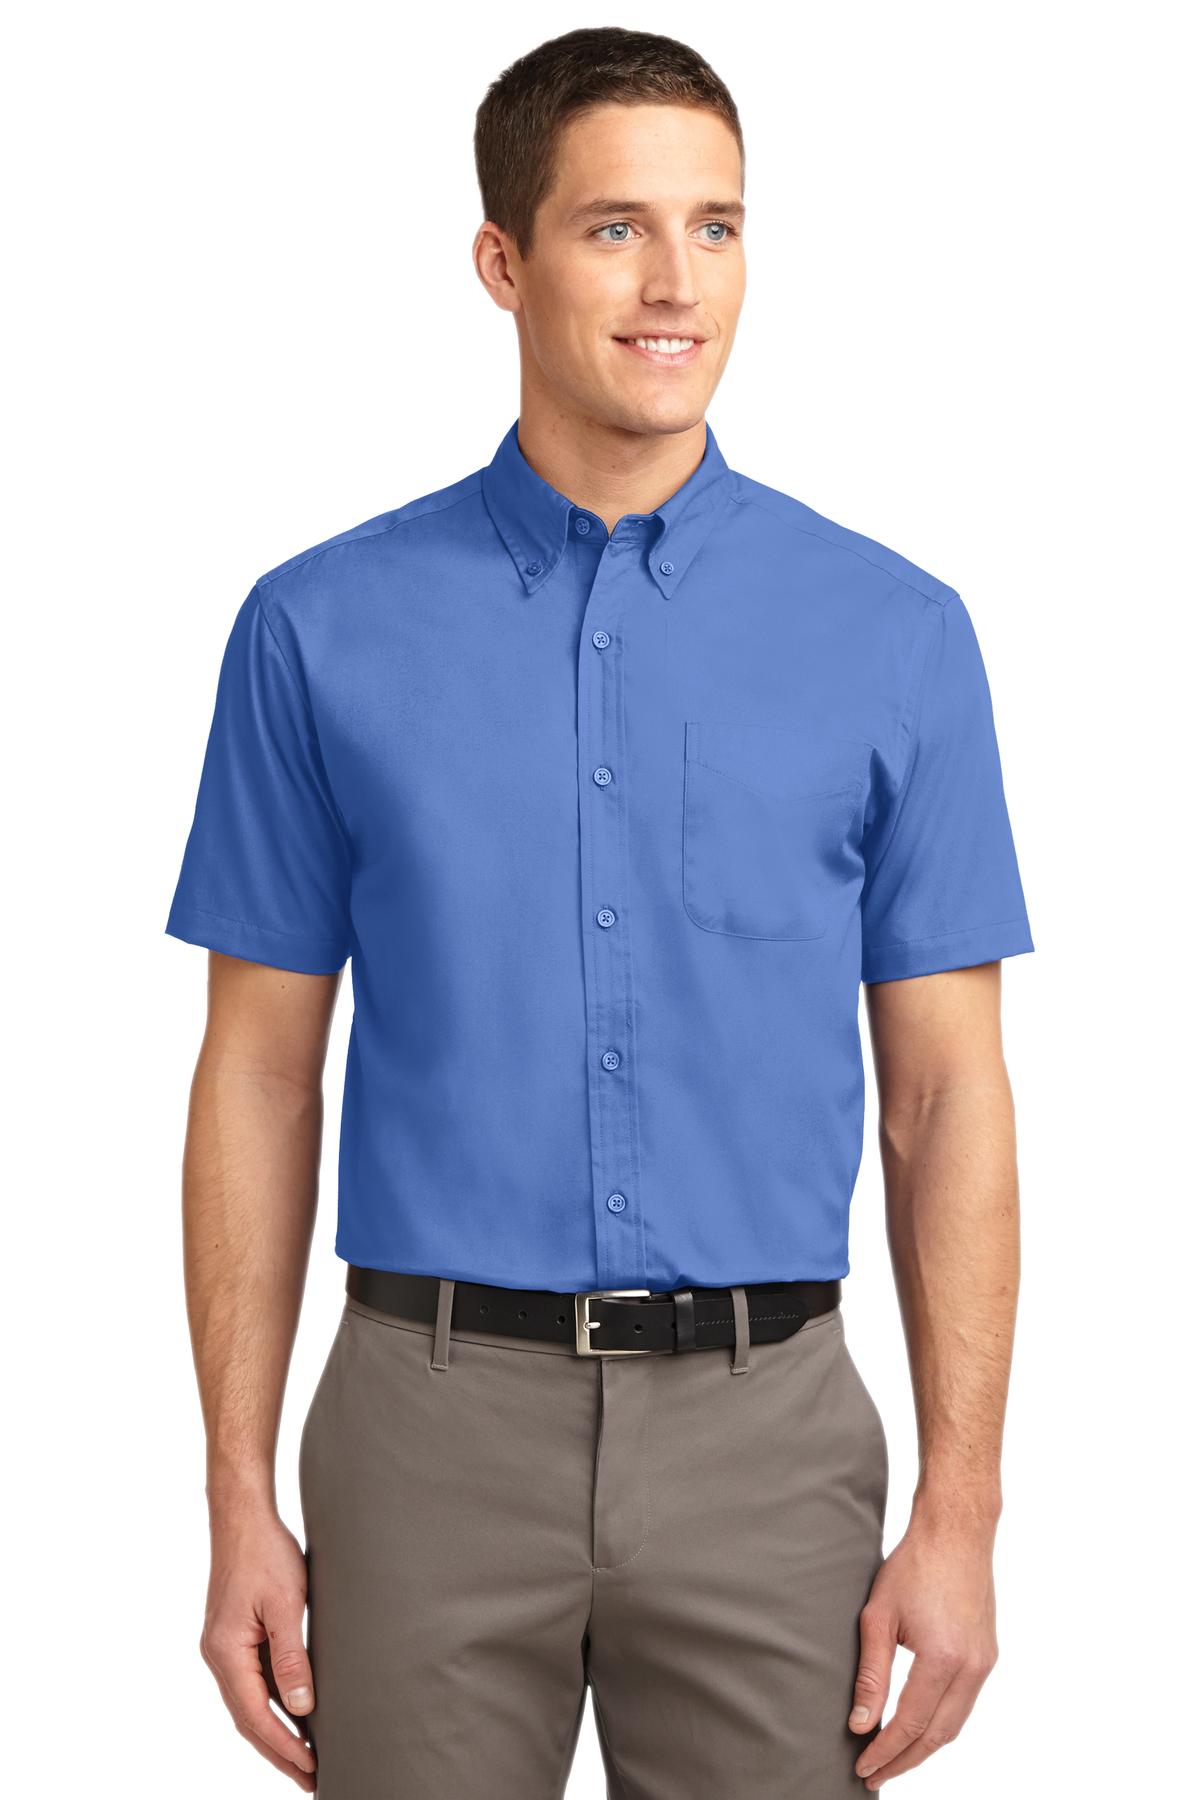 Available in 27 Colors 5X Mediterranean Blue Port Authority Short Sleeve Easy Care Shirt S508